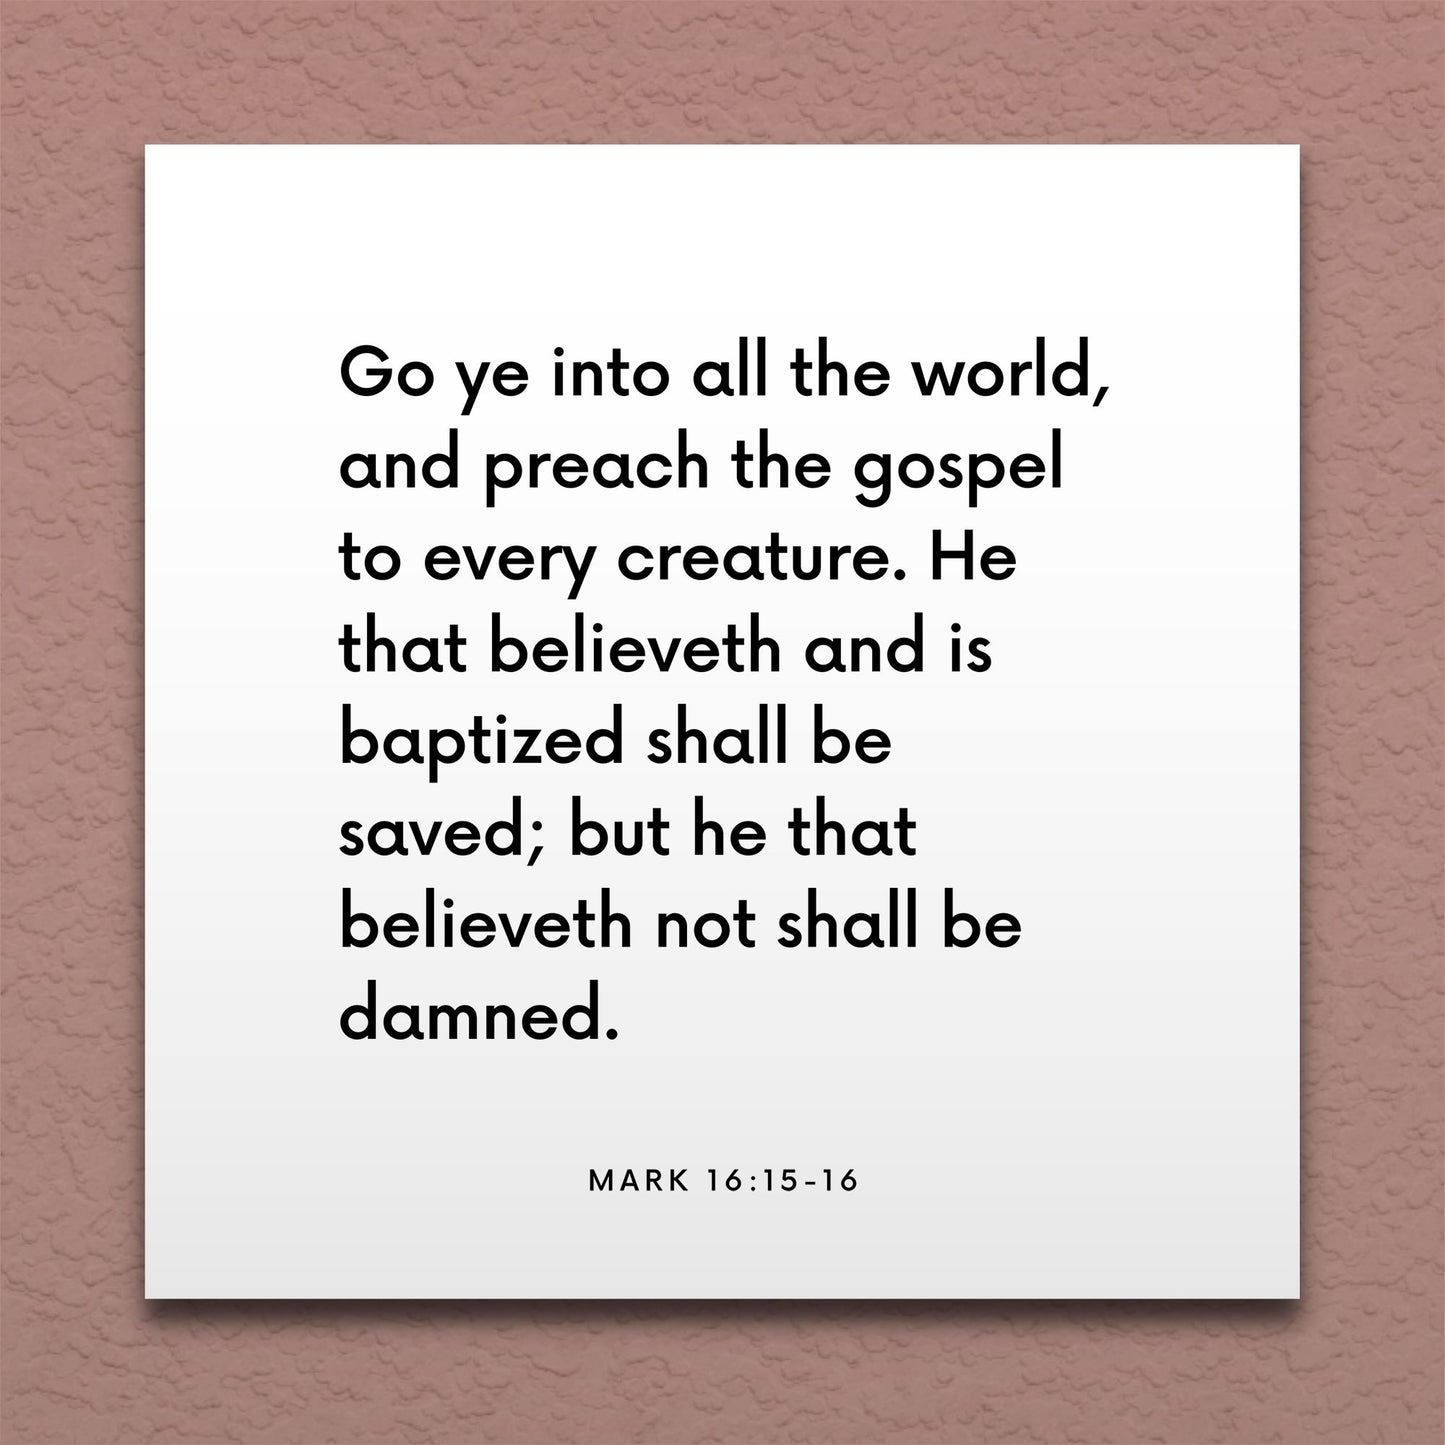 Wall-mounted scripture tile for Mark 16:15-16 - "Go ye into all the world, and preach the gospel"